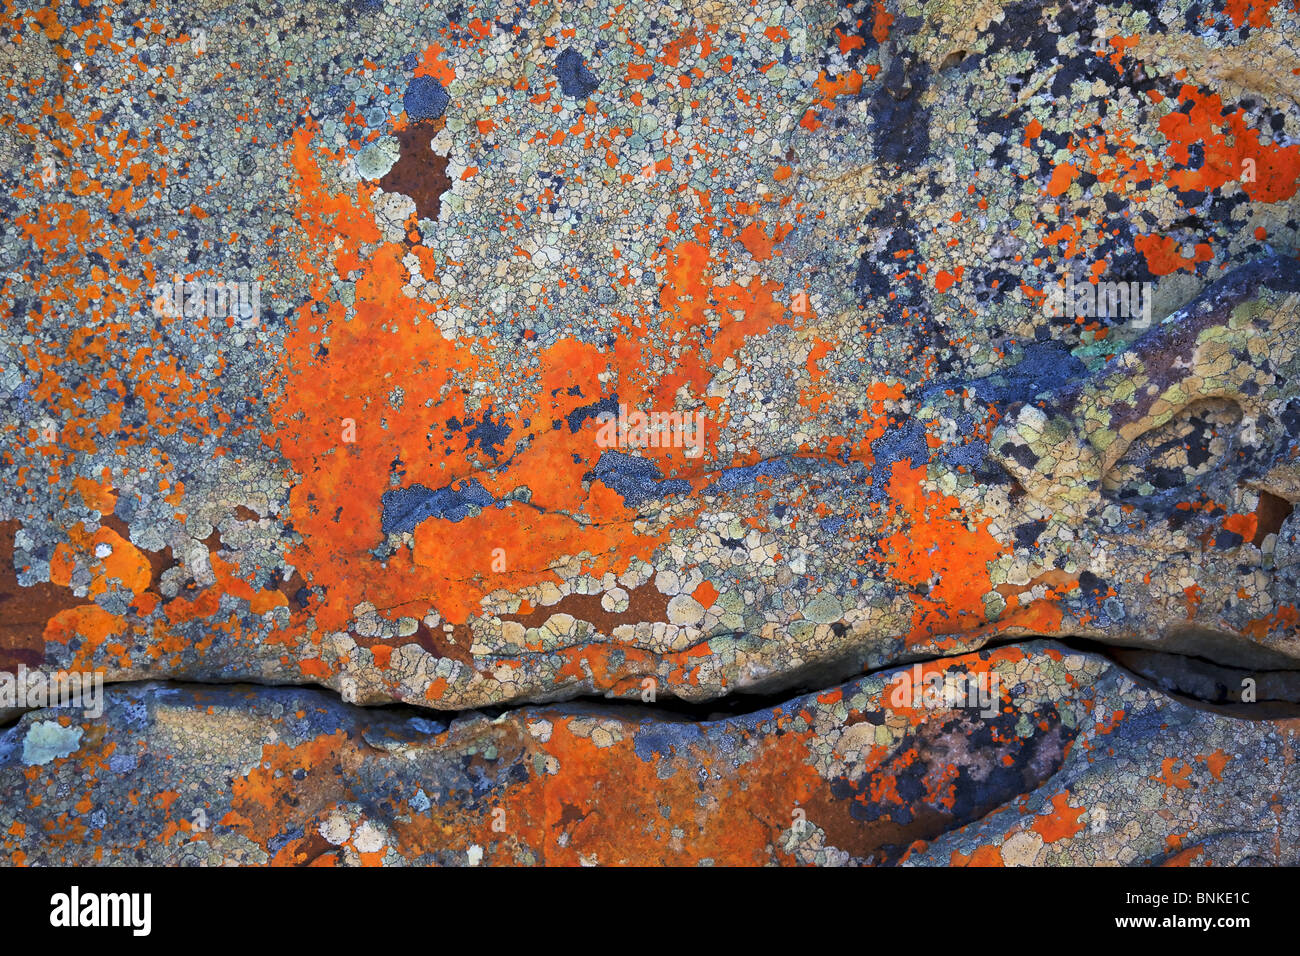 Abstract lichen patterns on a rock, Cape of Good Hope, Table Mountain National Park, South Africa. Stock Photo